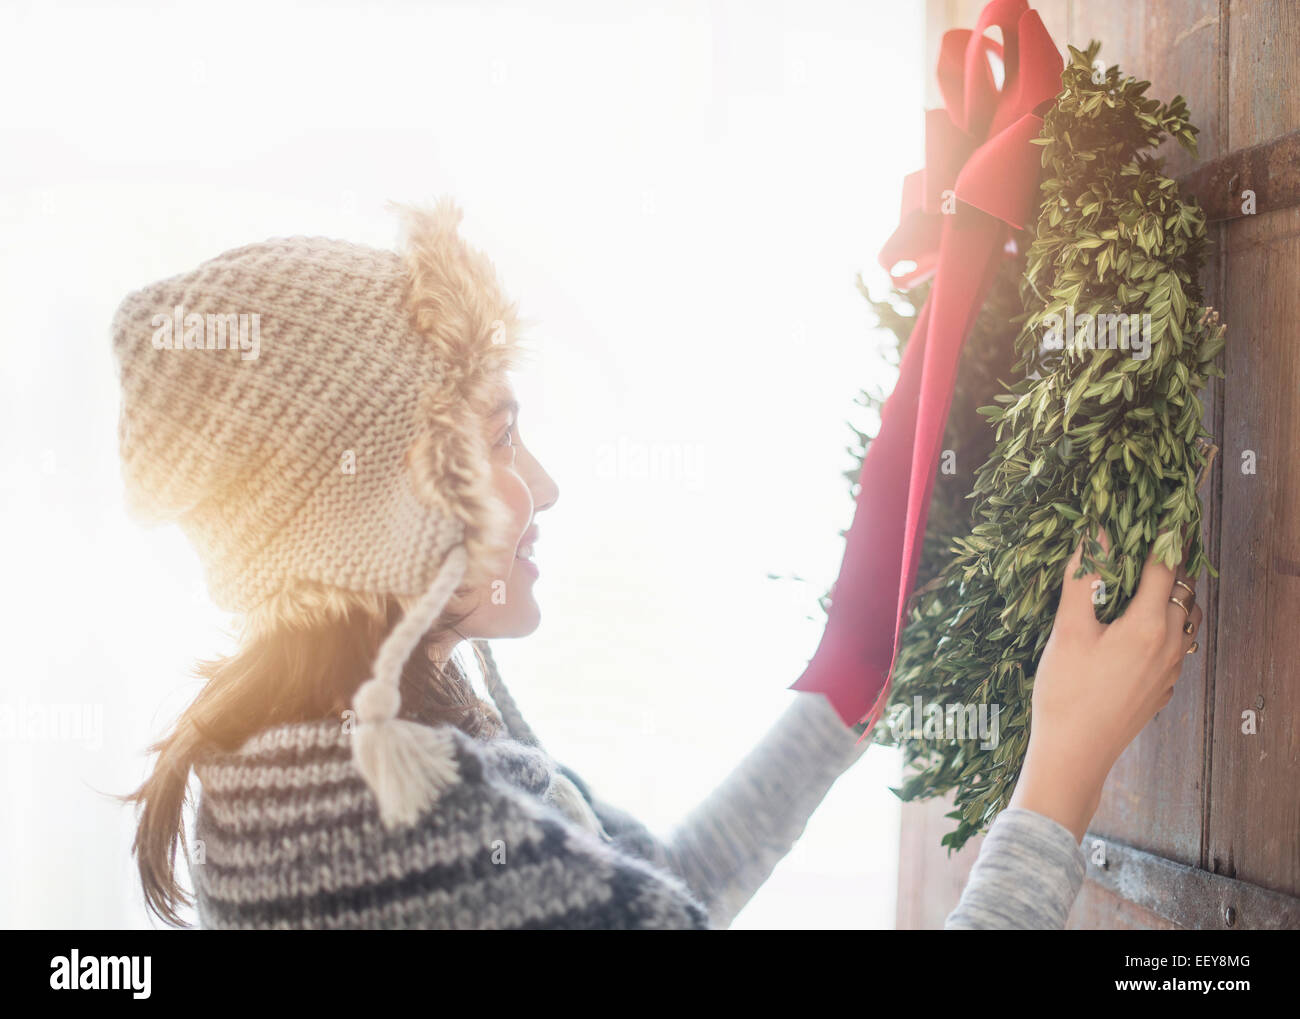 Side view of young woman hanging Christmas wreath on entrance door Stock Photo